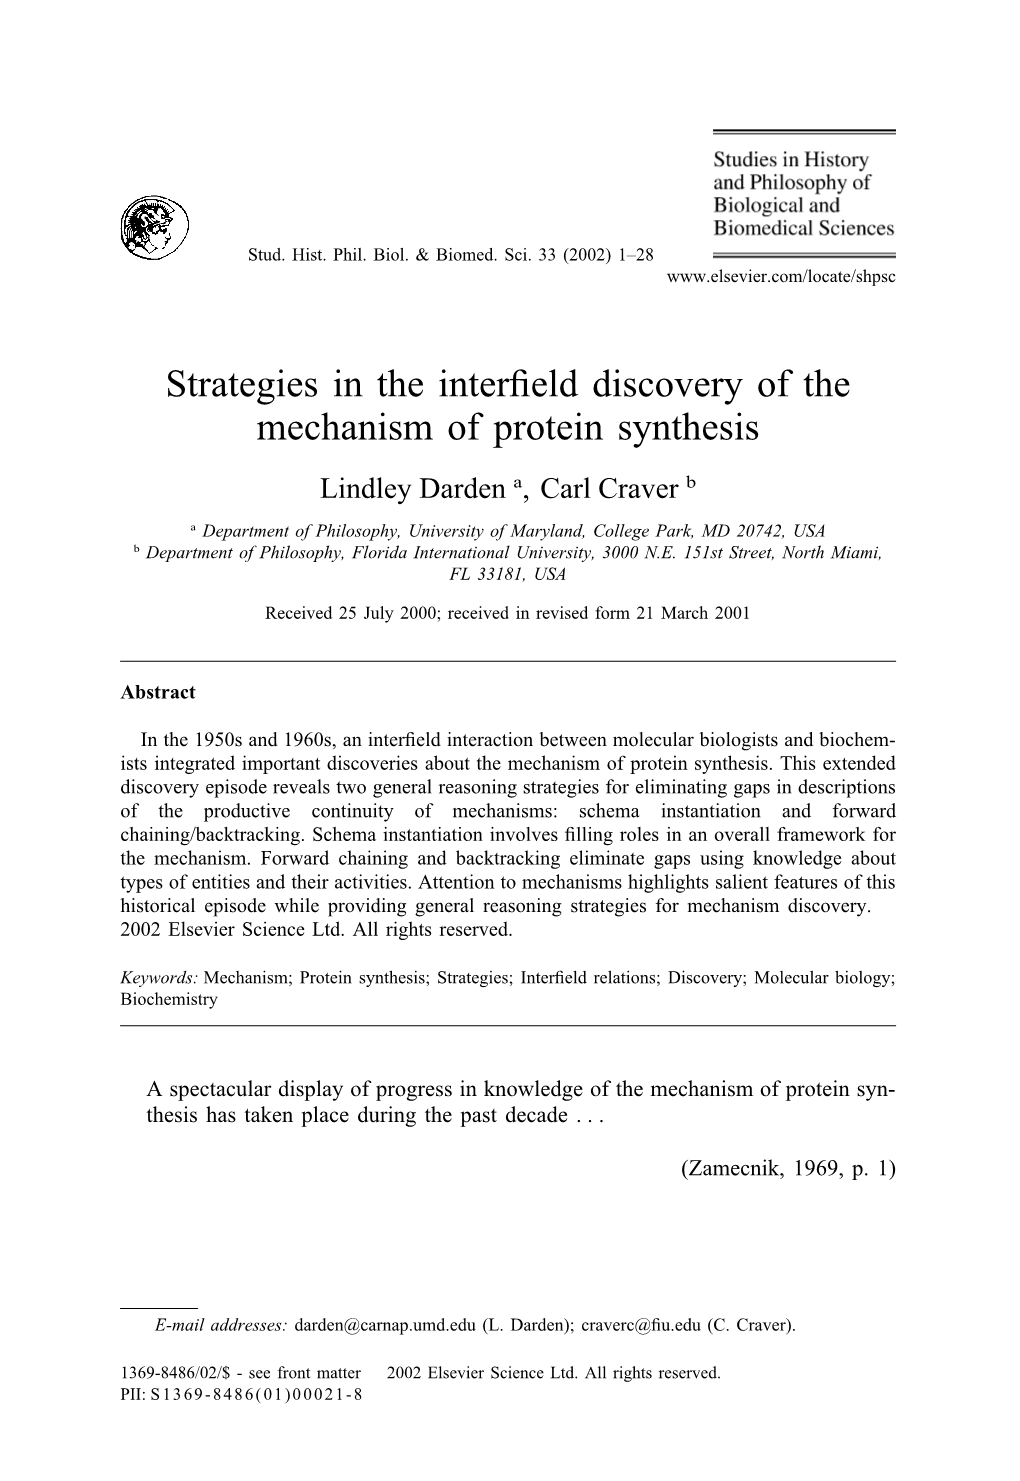 Strategies in the Interfield Discovery of the Mechanism of Protein Synthesis